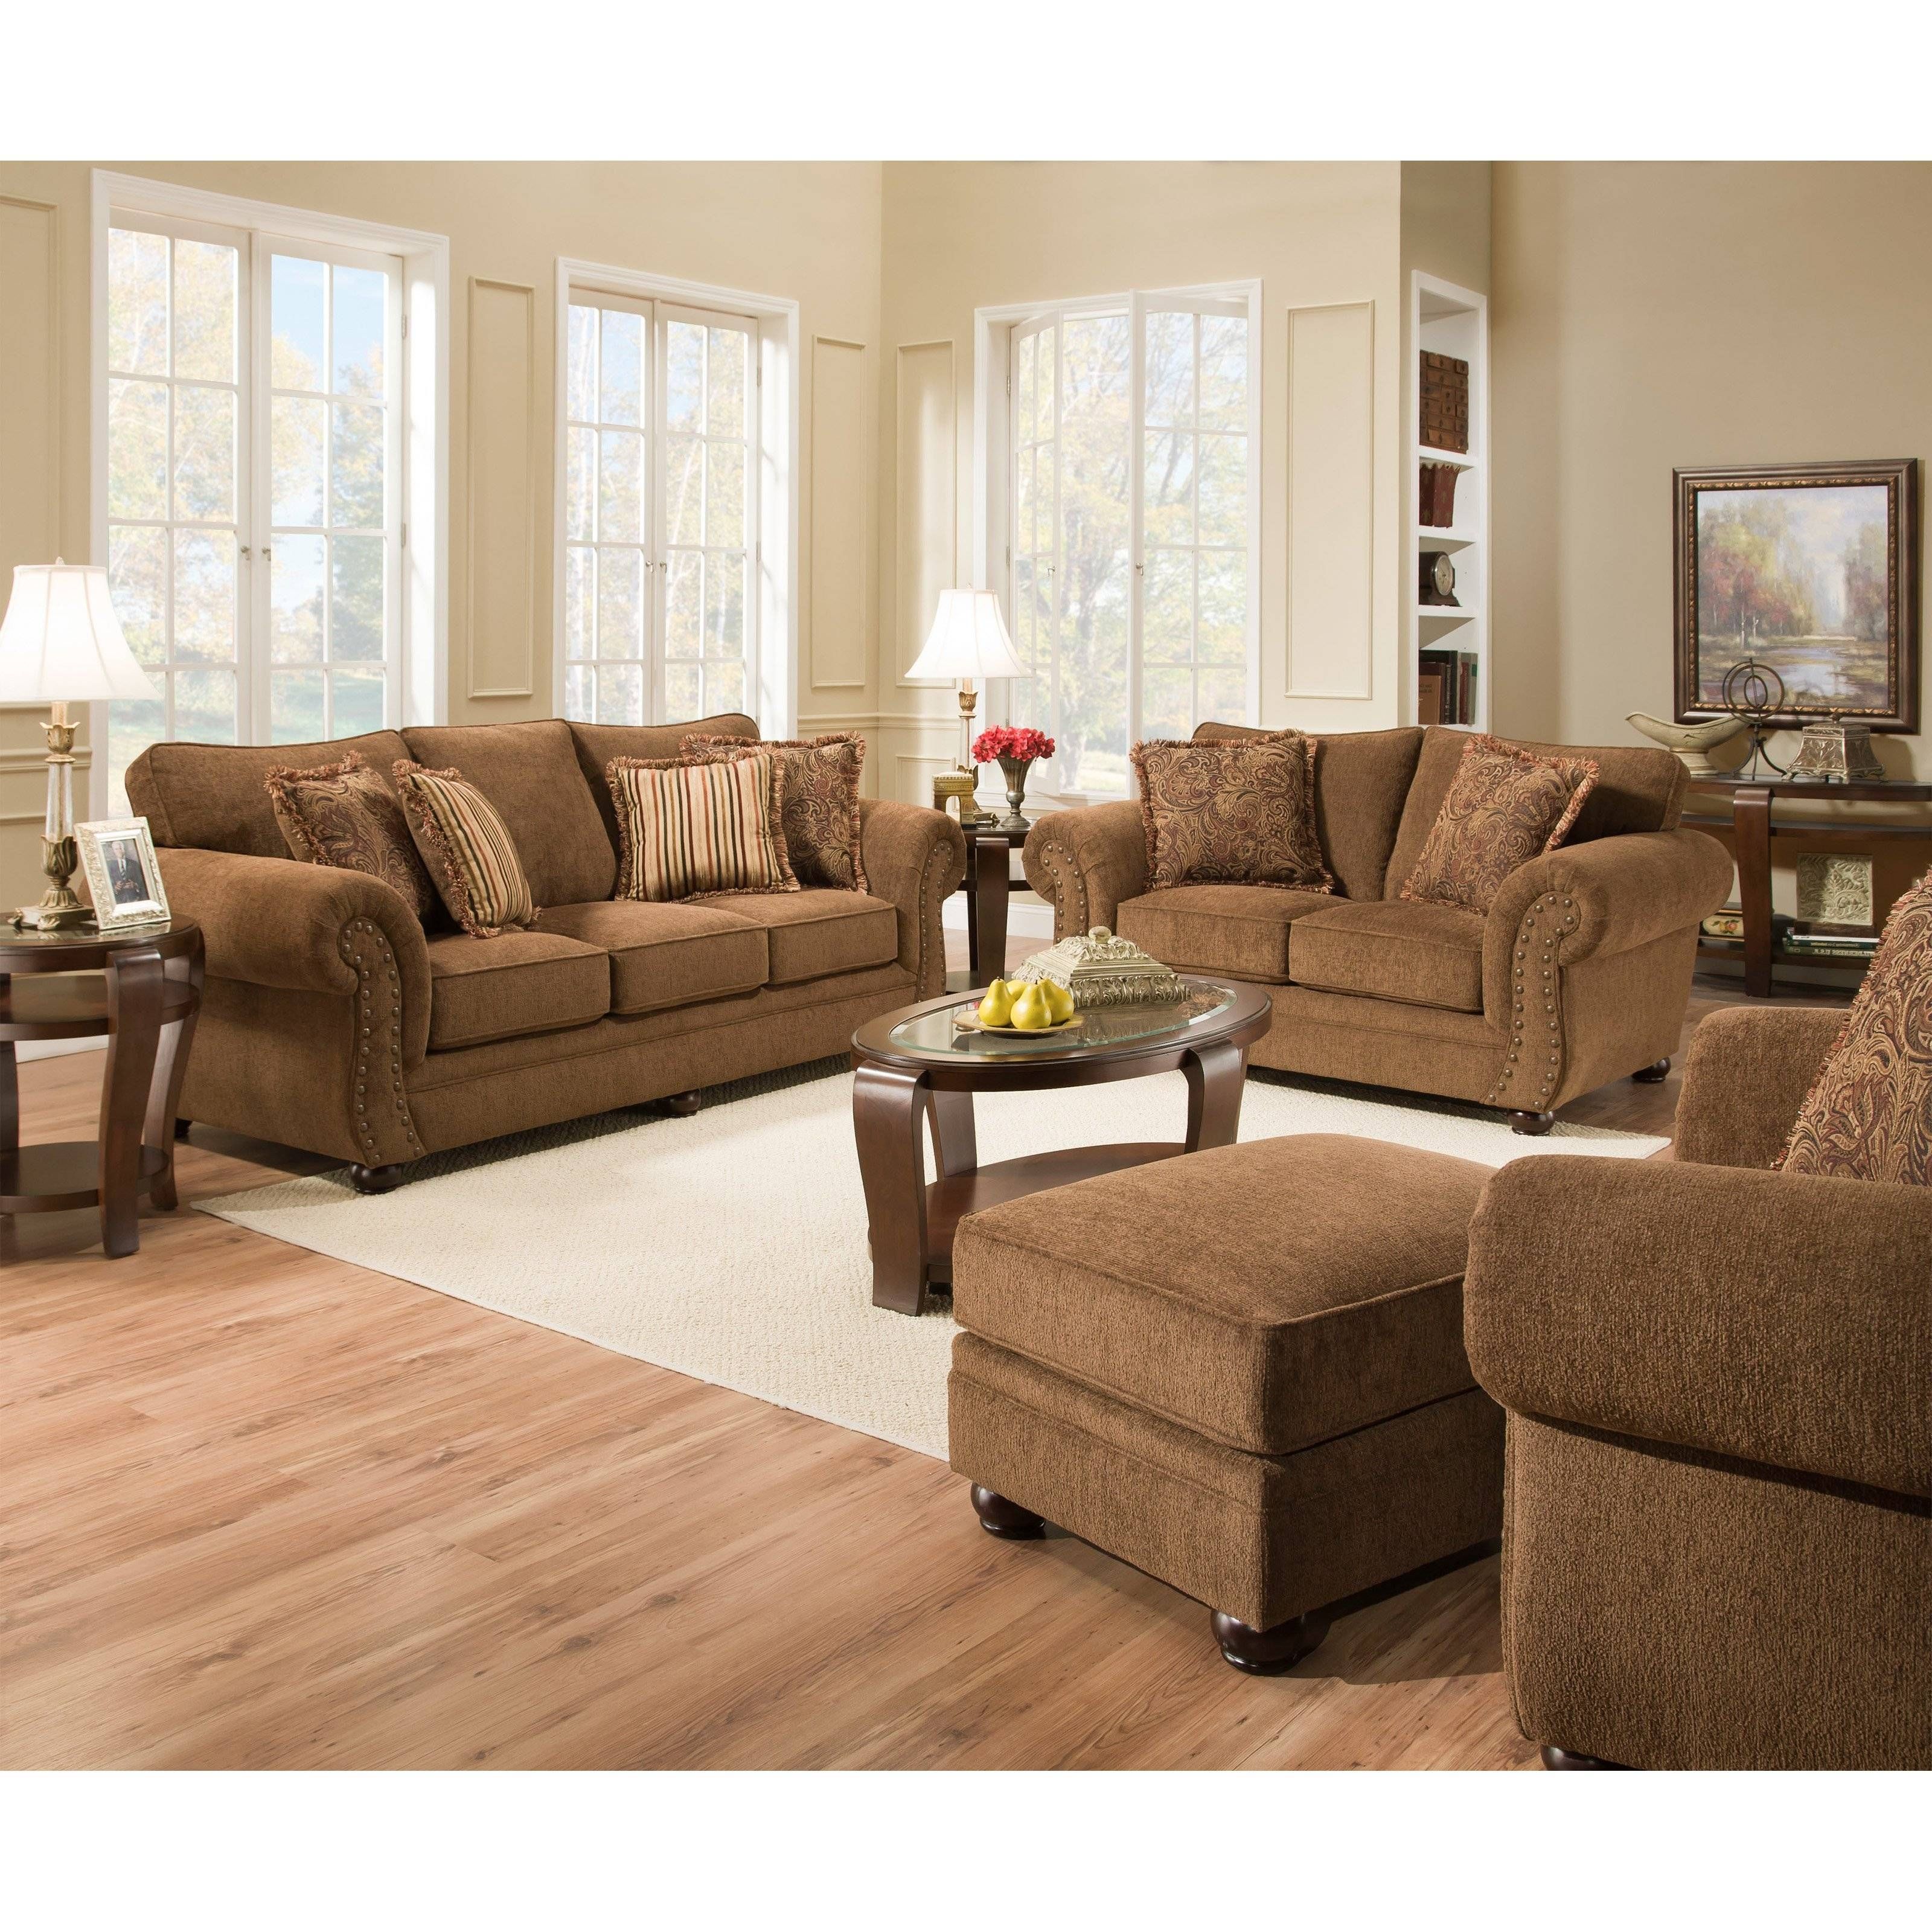 Simmons Upholstery Outback Chocolate Sofa Set | Hayneedle Intended For Simmons Sofas And Loveseats (View 2 of 15)